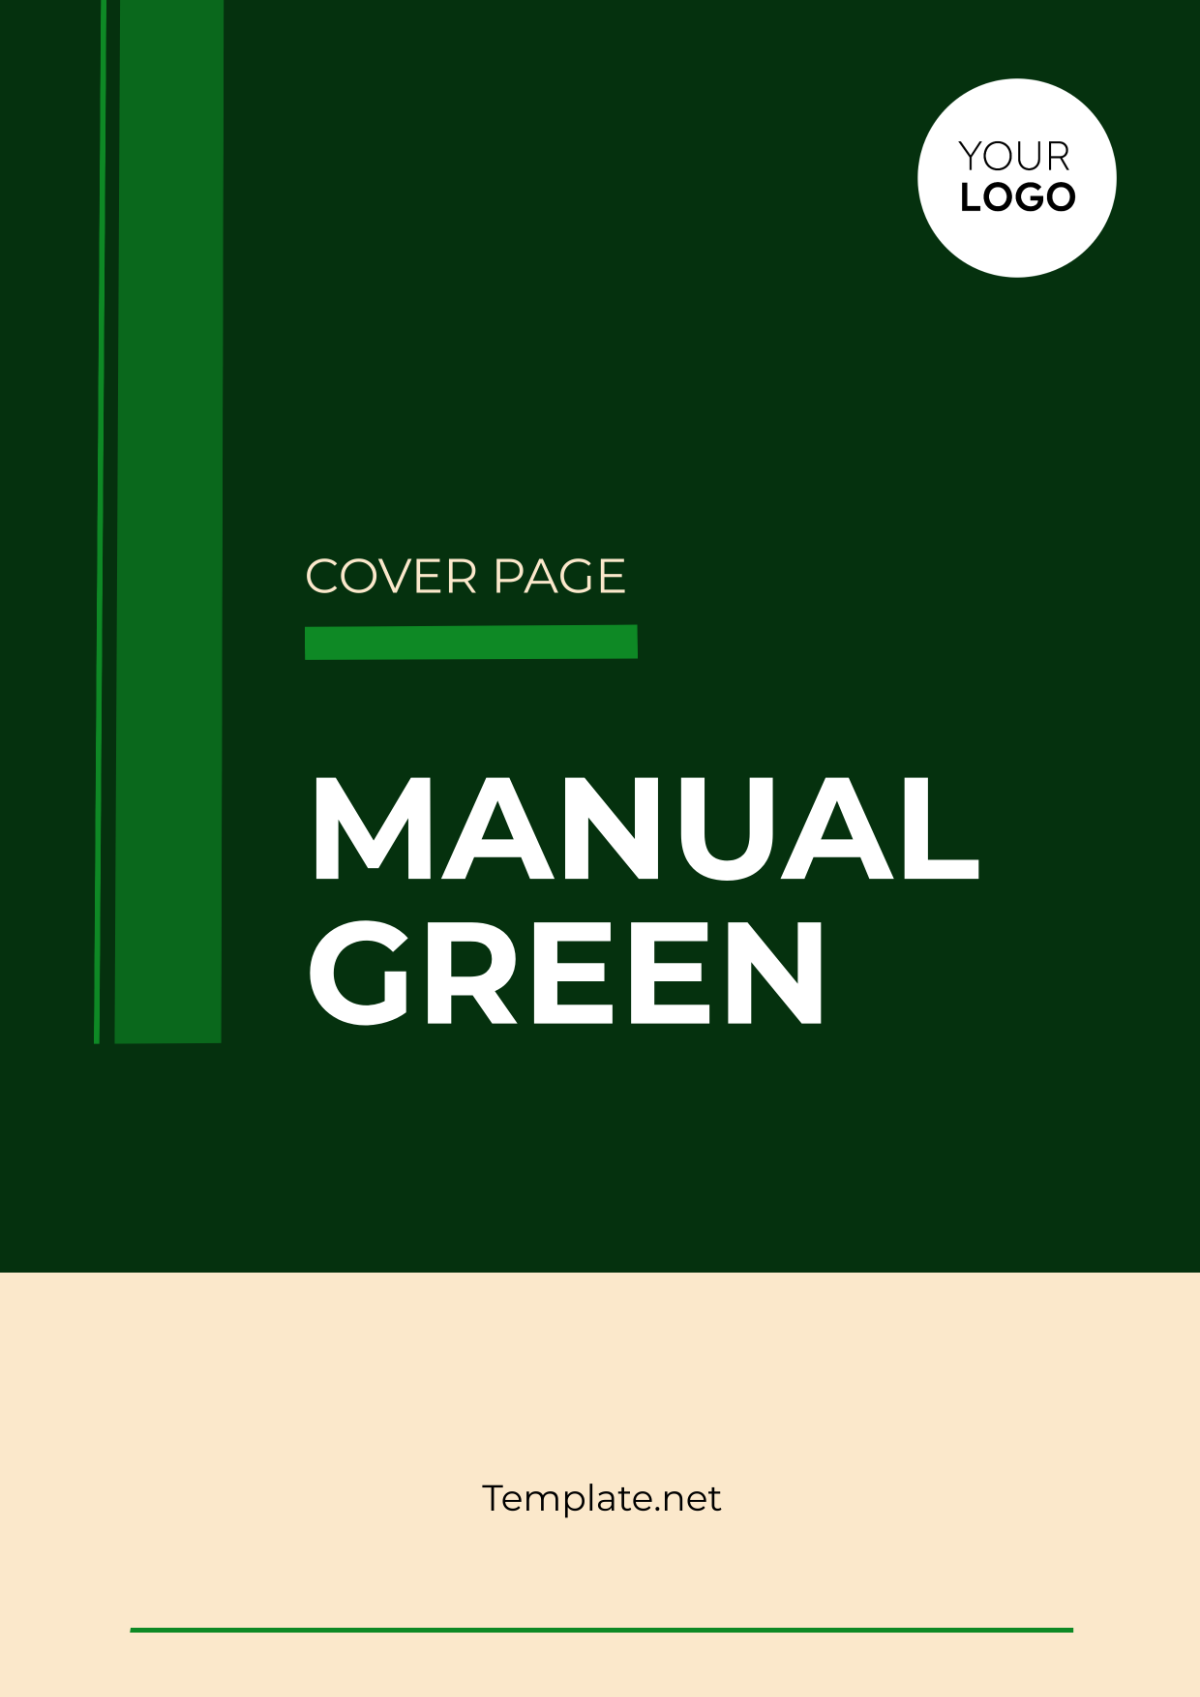 Manual Green Cover Page Template